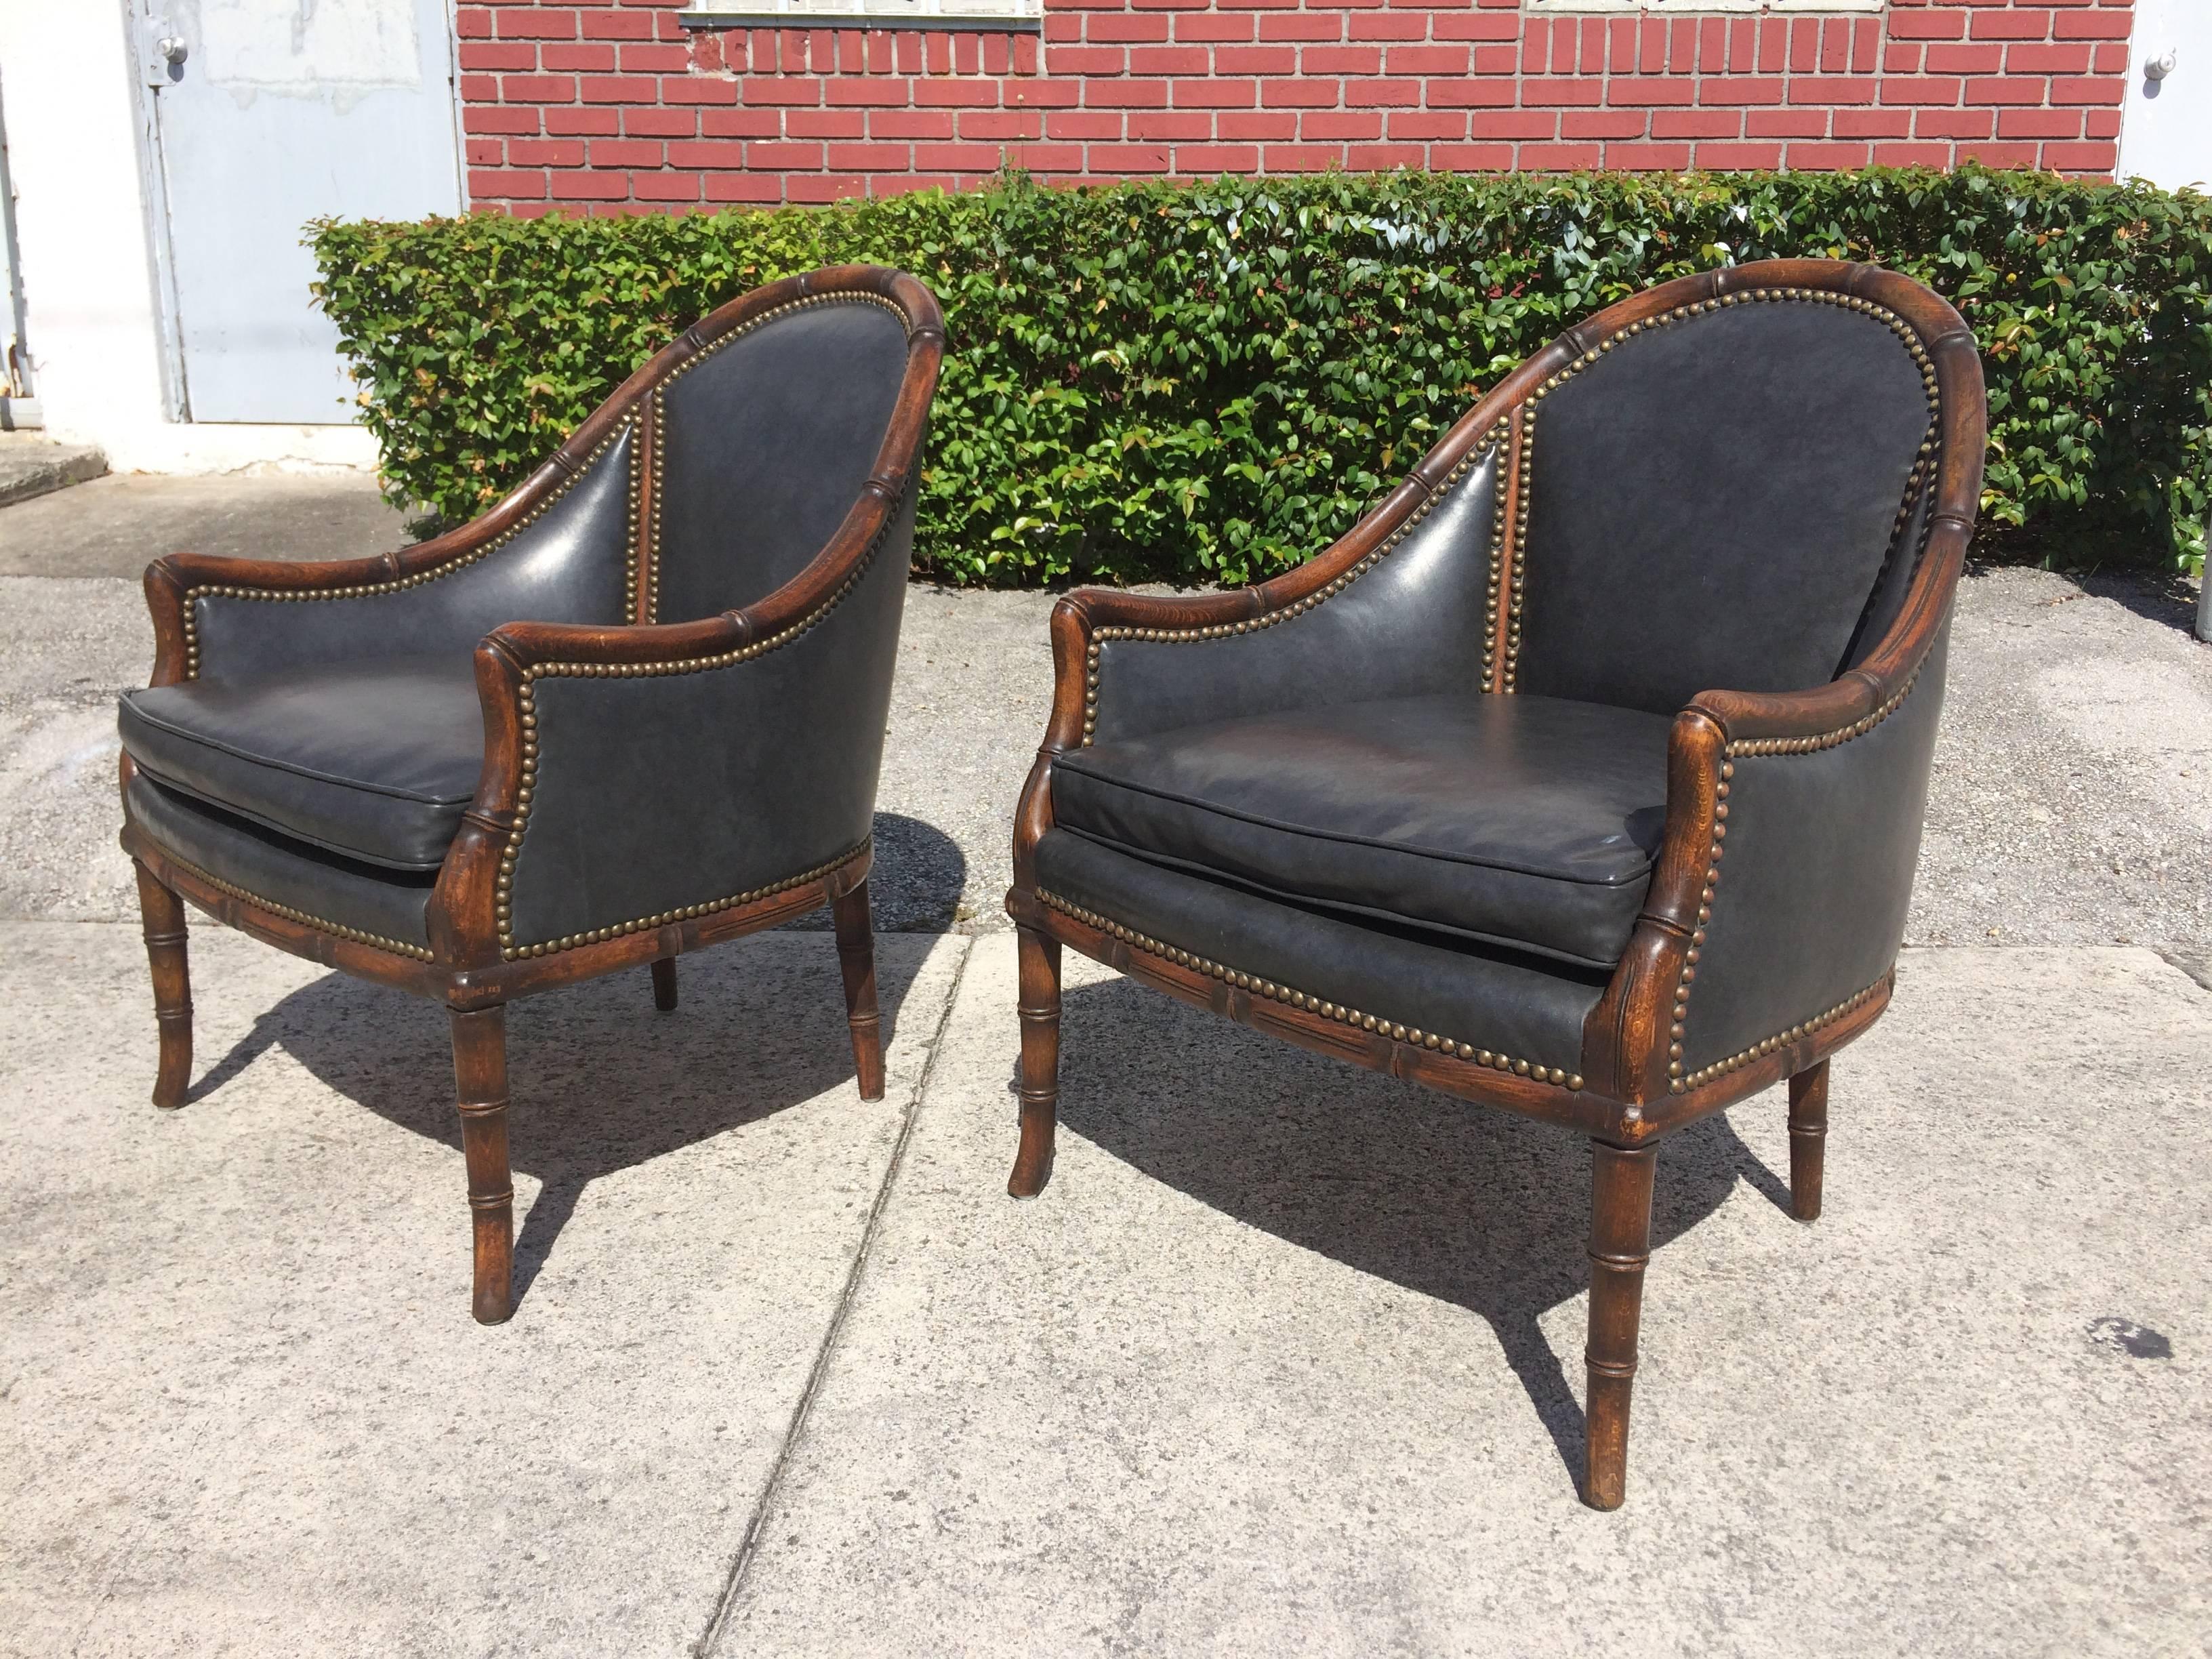 Solid wood frame with a faux bamboo design, brass nailheads and black faux leather upholstery, three chairs available.